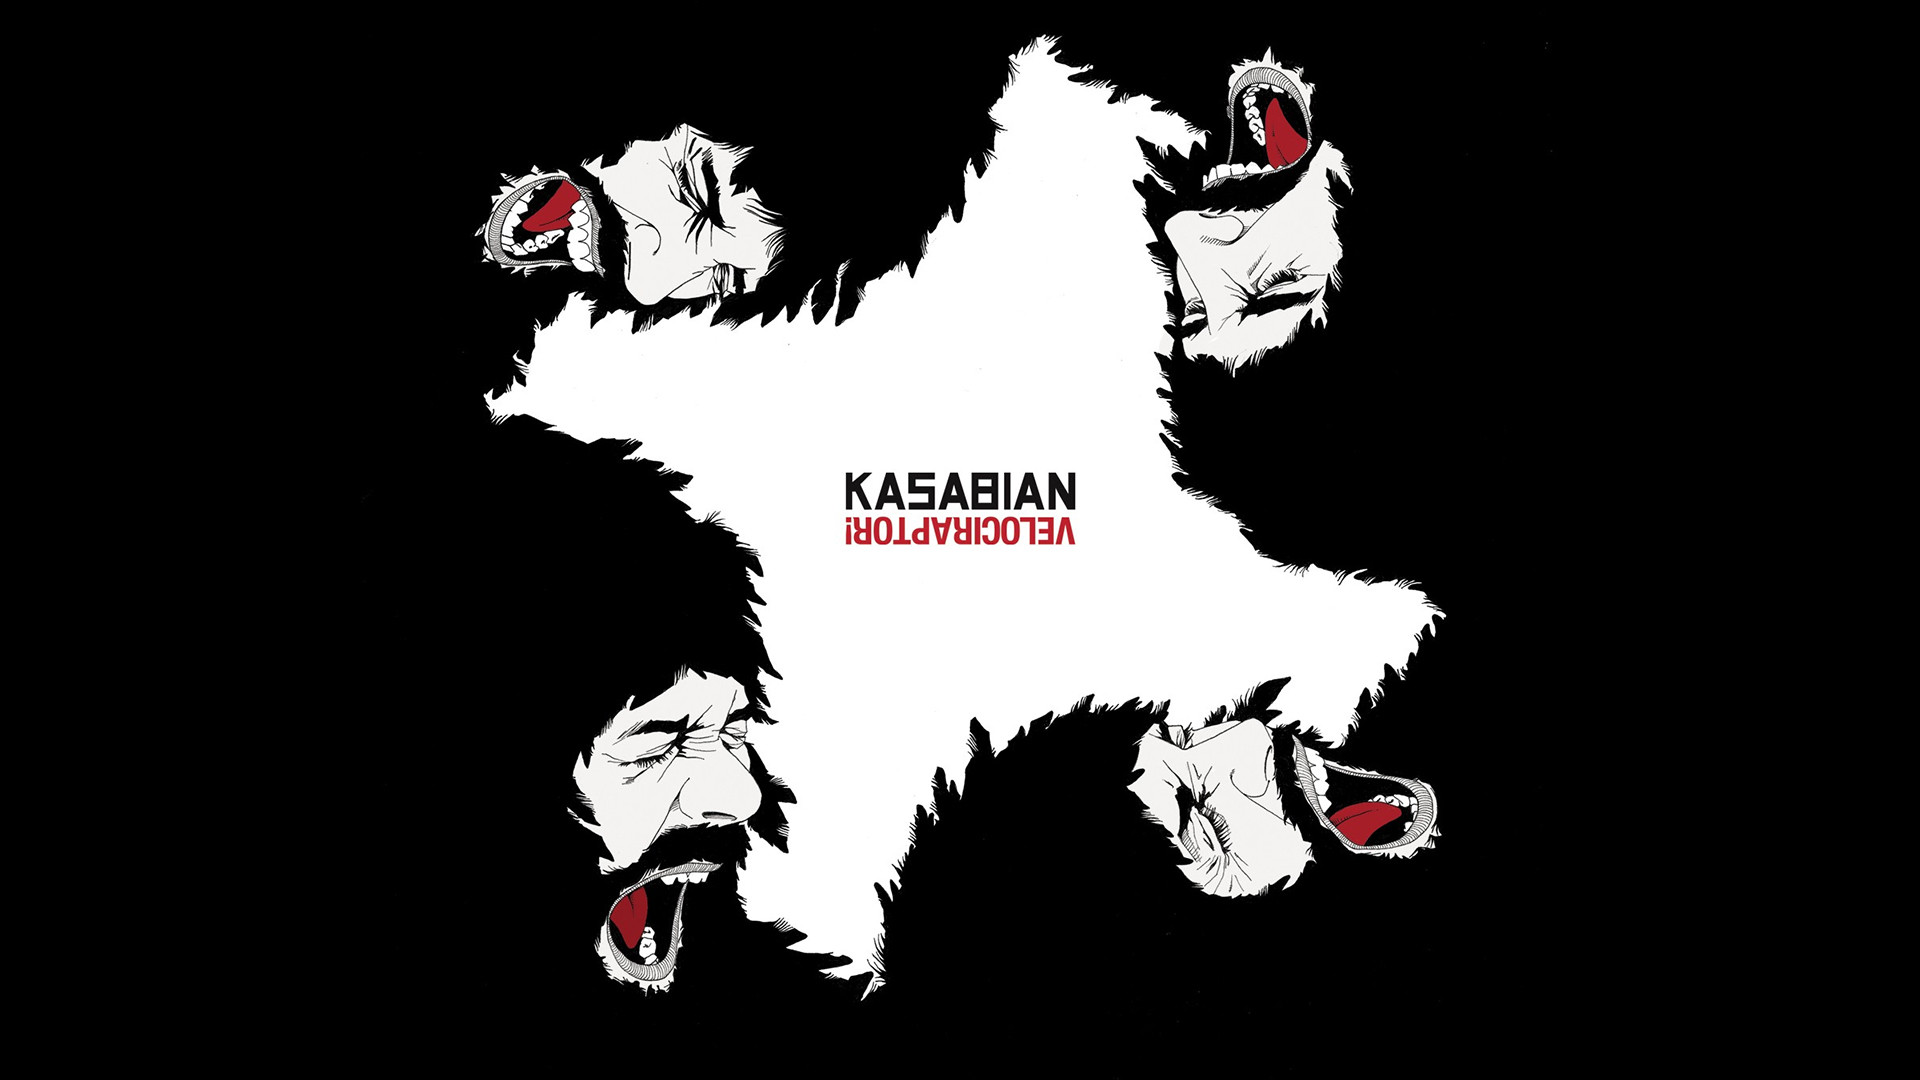 1920x1080 Kasabian Psychedelic Rock Indie Music